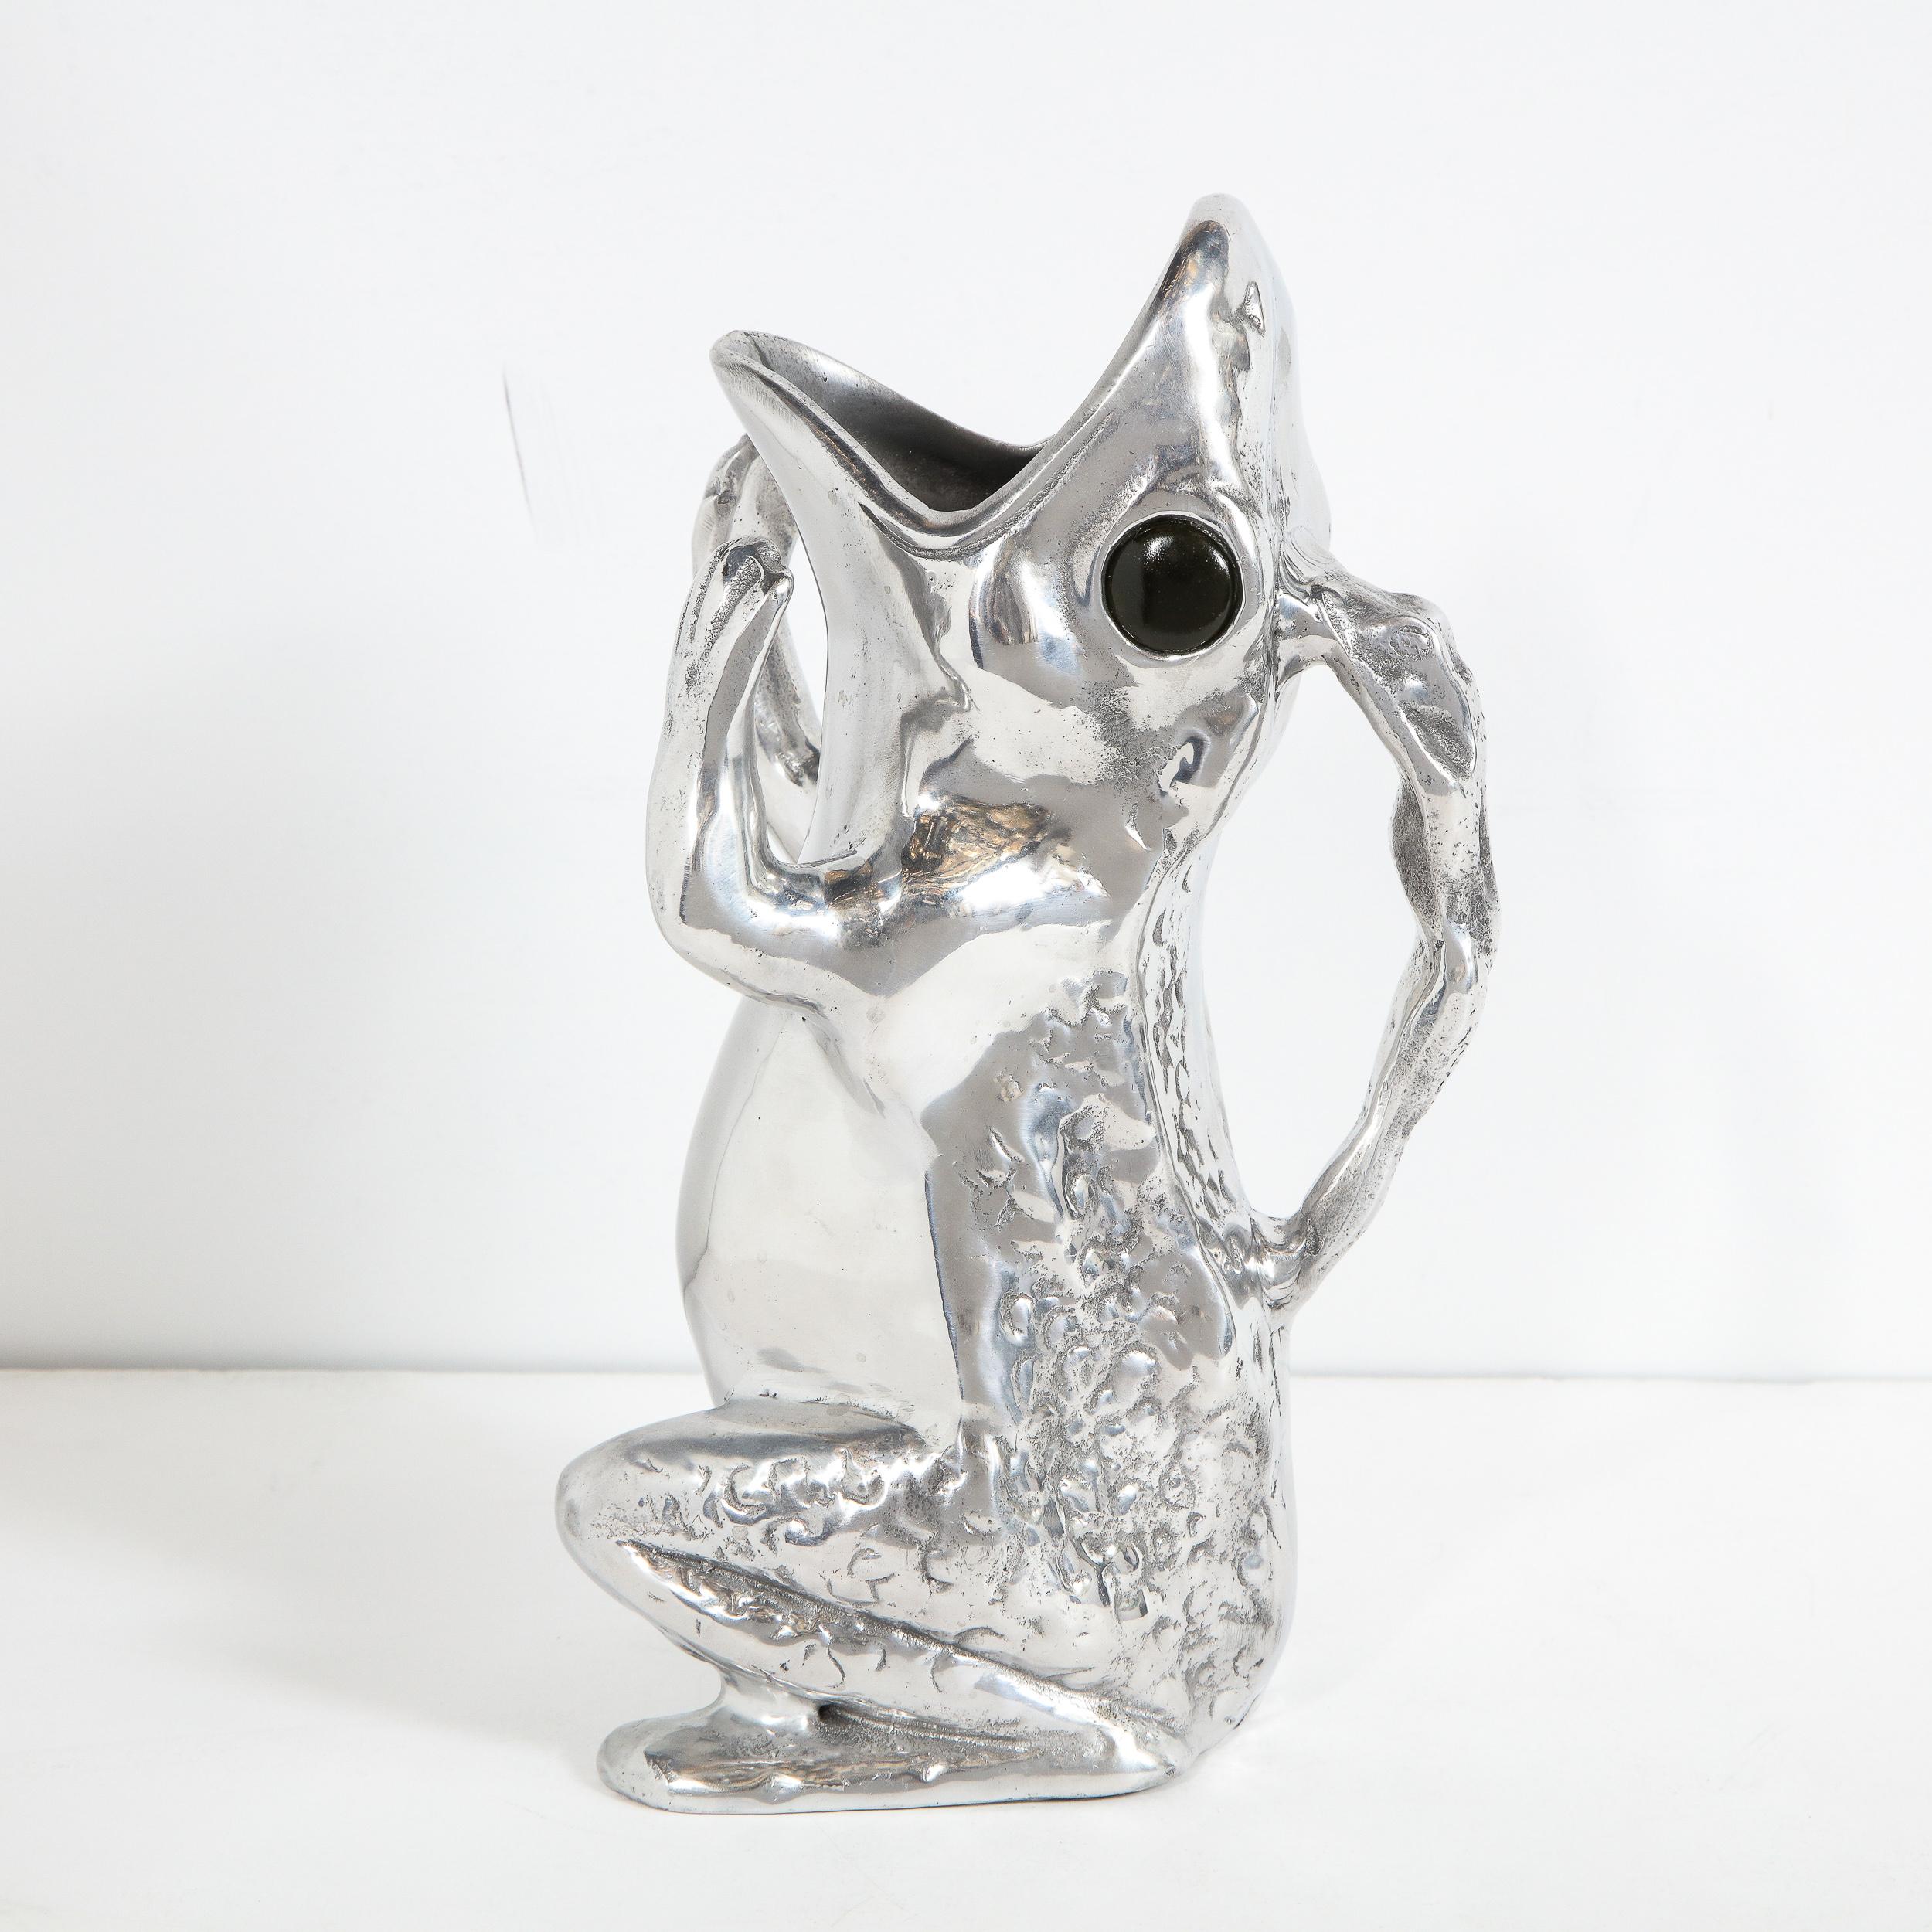 This sophisticated and whimsical frog pitcher was realized by the esteemed designer Arthur Court in the United States, circa 1979. It offers a kneeling frog with its mouth agape and its arms outstretched, depicted either in the midst of screaming